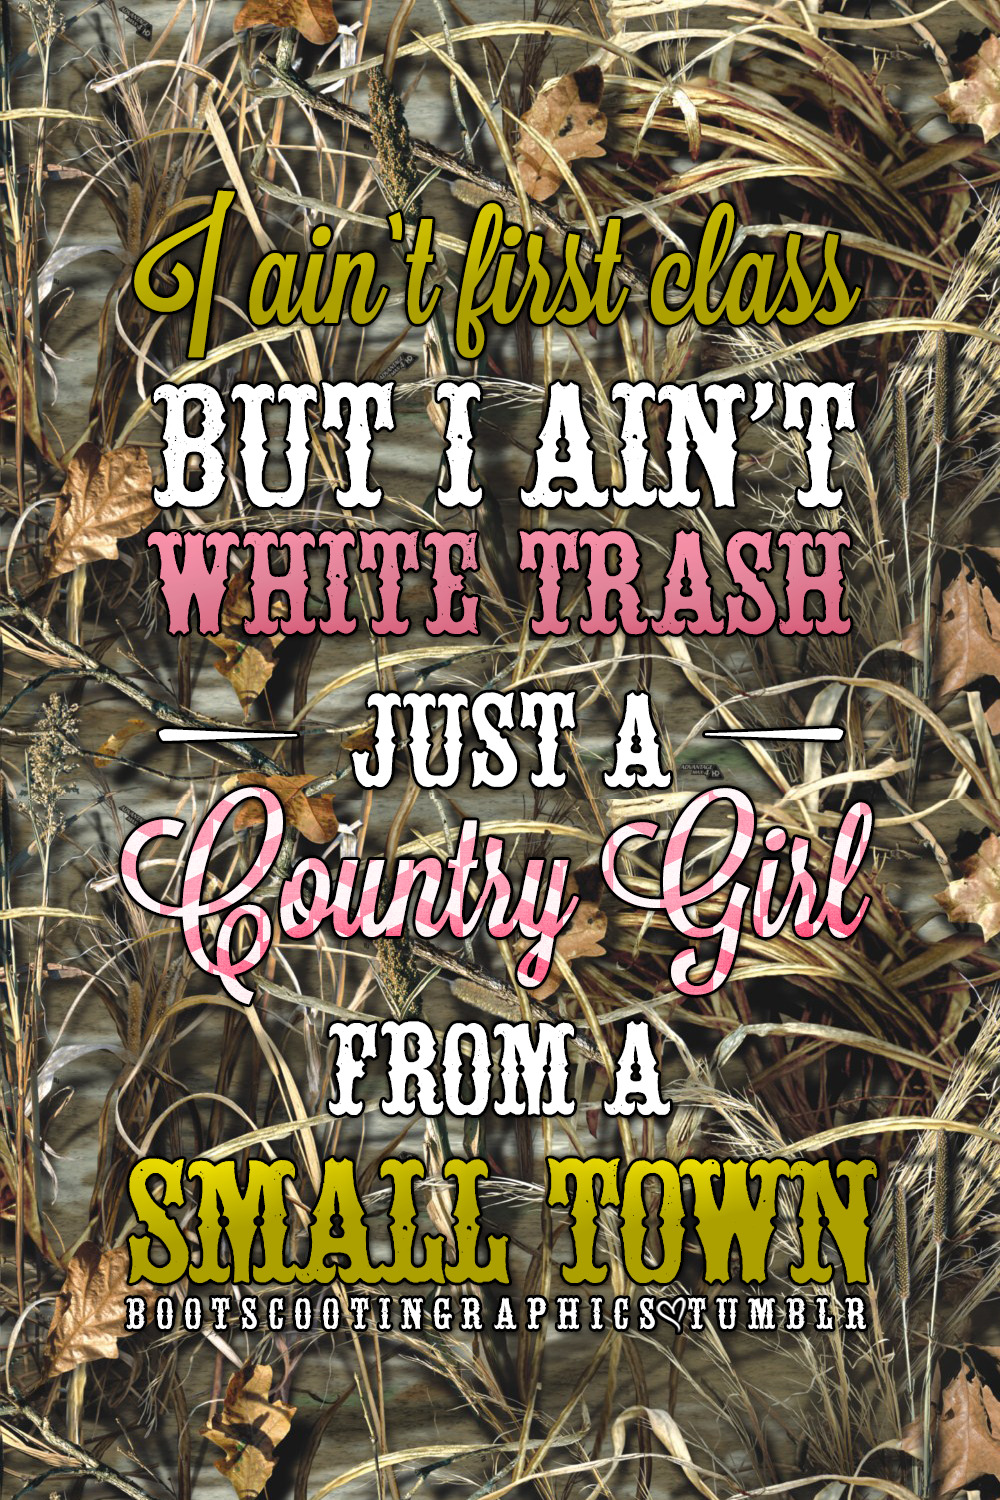 southern girl quotes tumblr